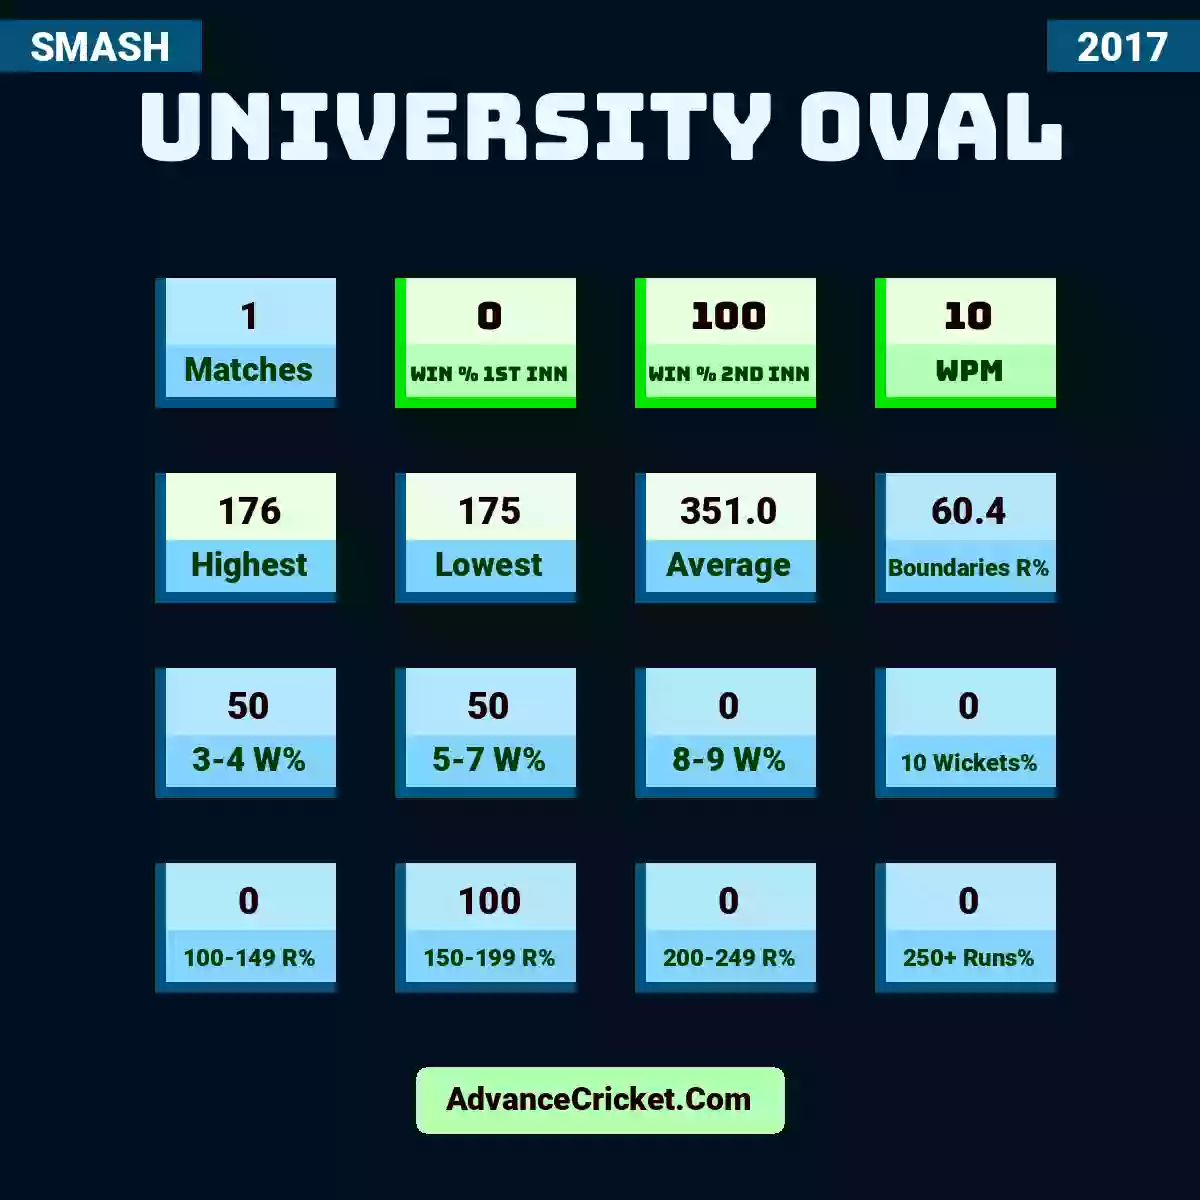 Image showing University Oval with Matches: 1, Win % 1st Inn: 0, Win % 2nd Inn: 100, WPM: 10, Highest: 176, Lowest: 175, Average: 351.0, Boundaries R%: 60.4, 3-4 W%: 50, 5-7 W%: 50, 8-9 W%: 0, 10 Wickets%: 0, 100-149 R%: 0, 150-199 R%: 100, 200-249 R%: 0, 250+ Runs%: 0.